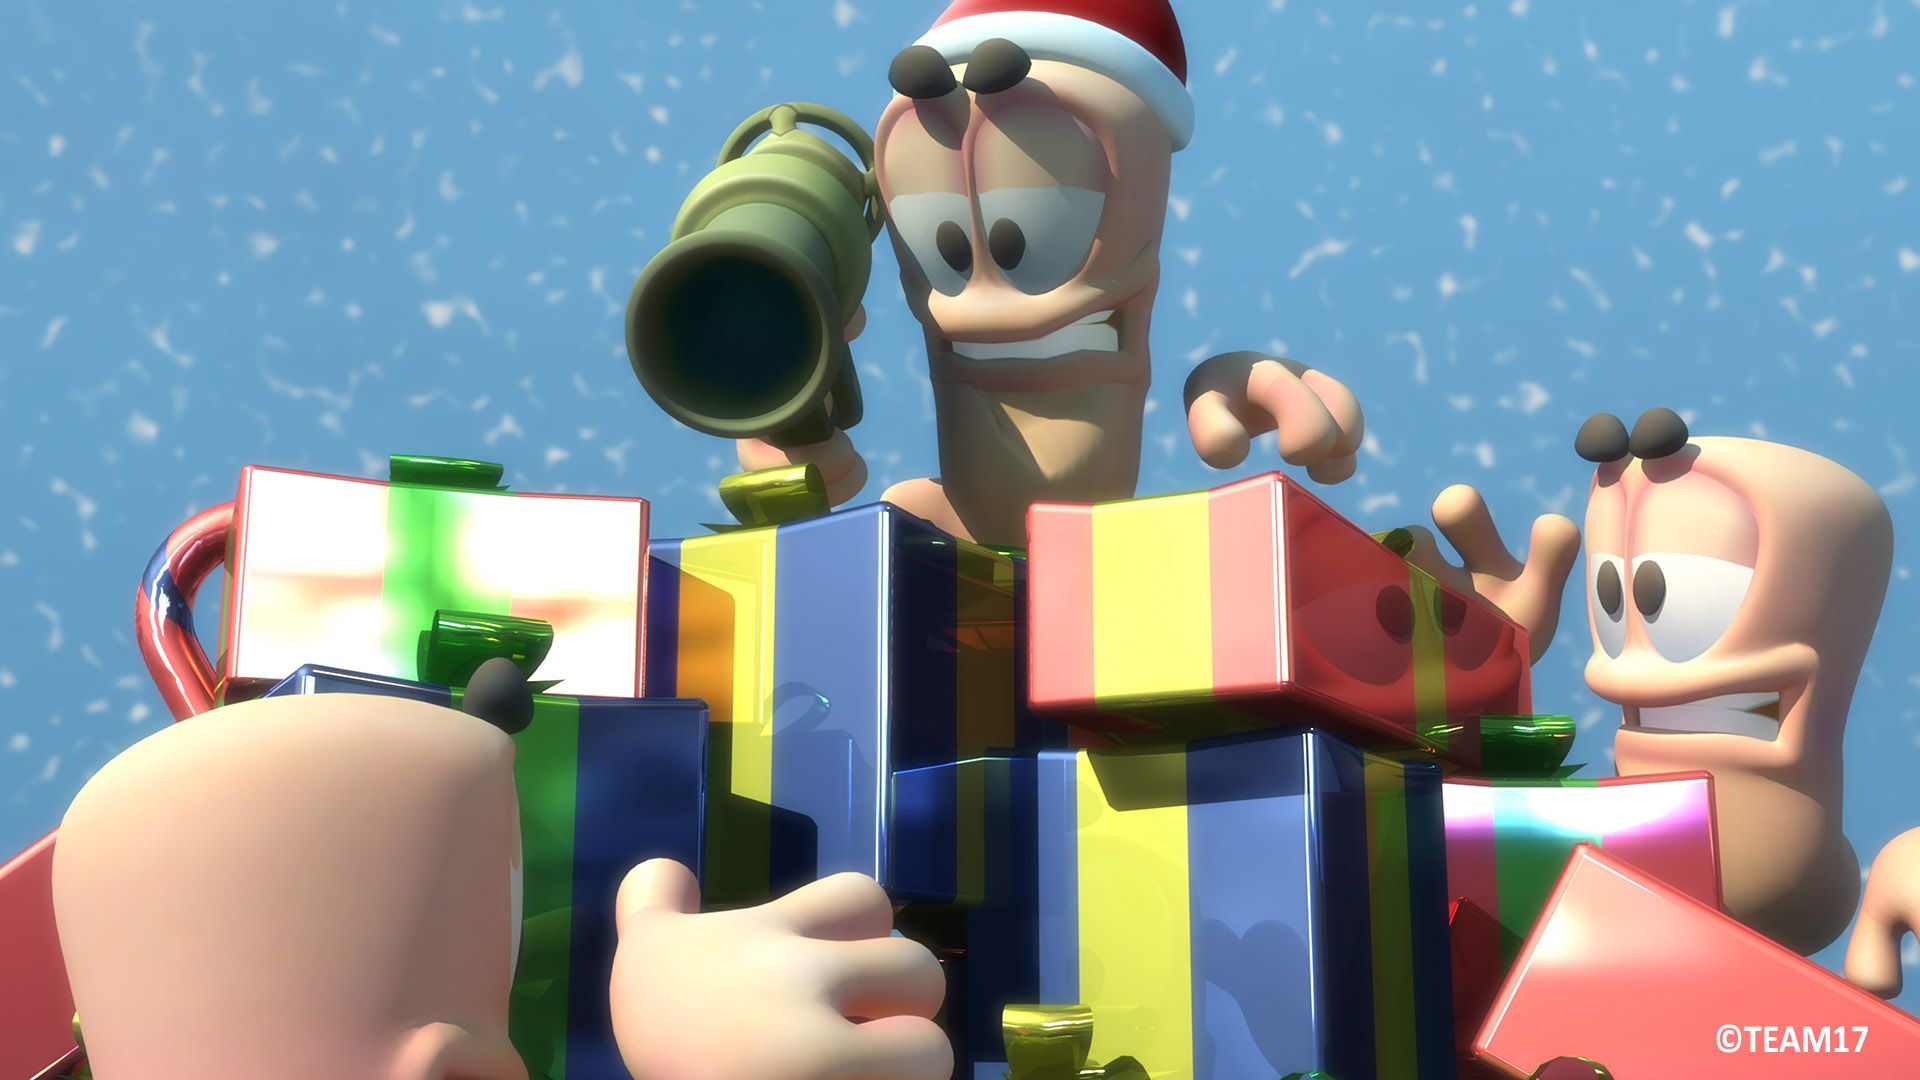 Worms Christmas Card for Team17